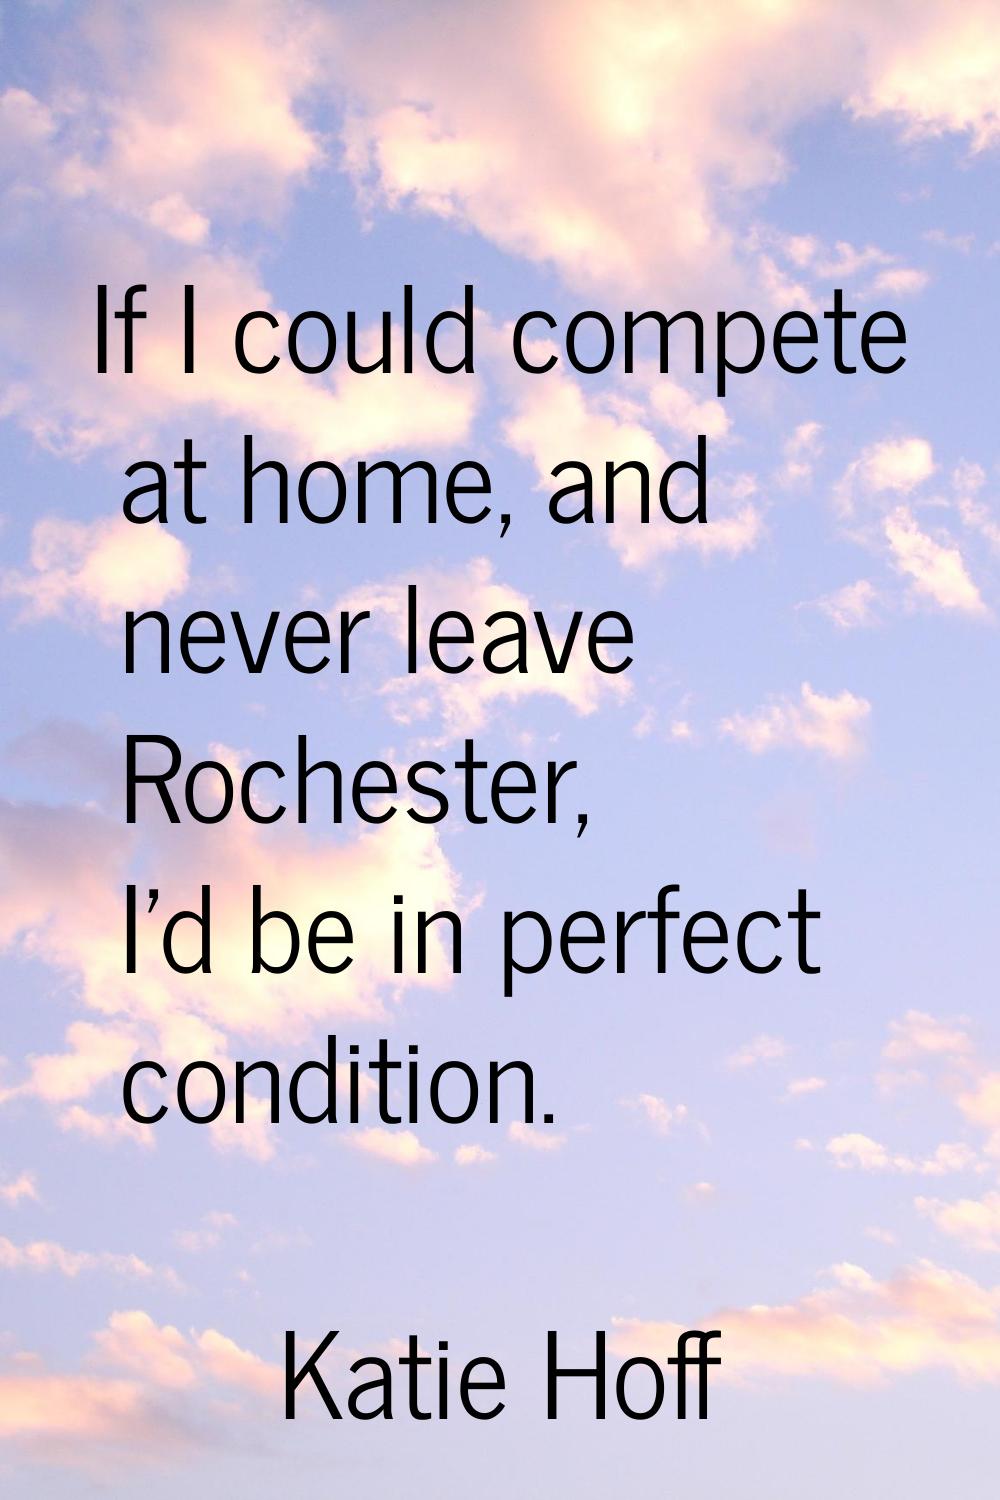 If I could compete at home, and never leave Rochester, I'd be in perfect condition.